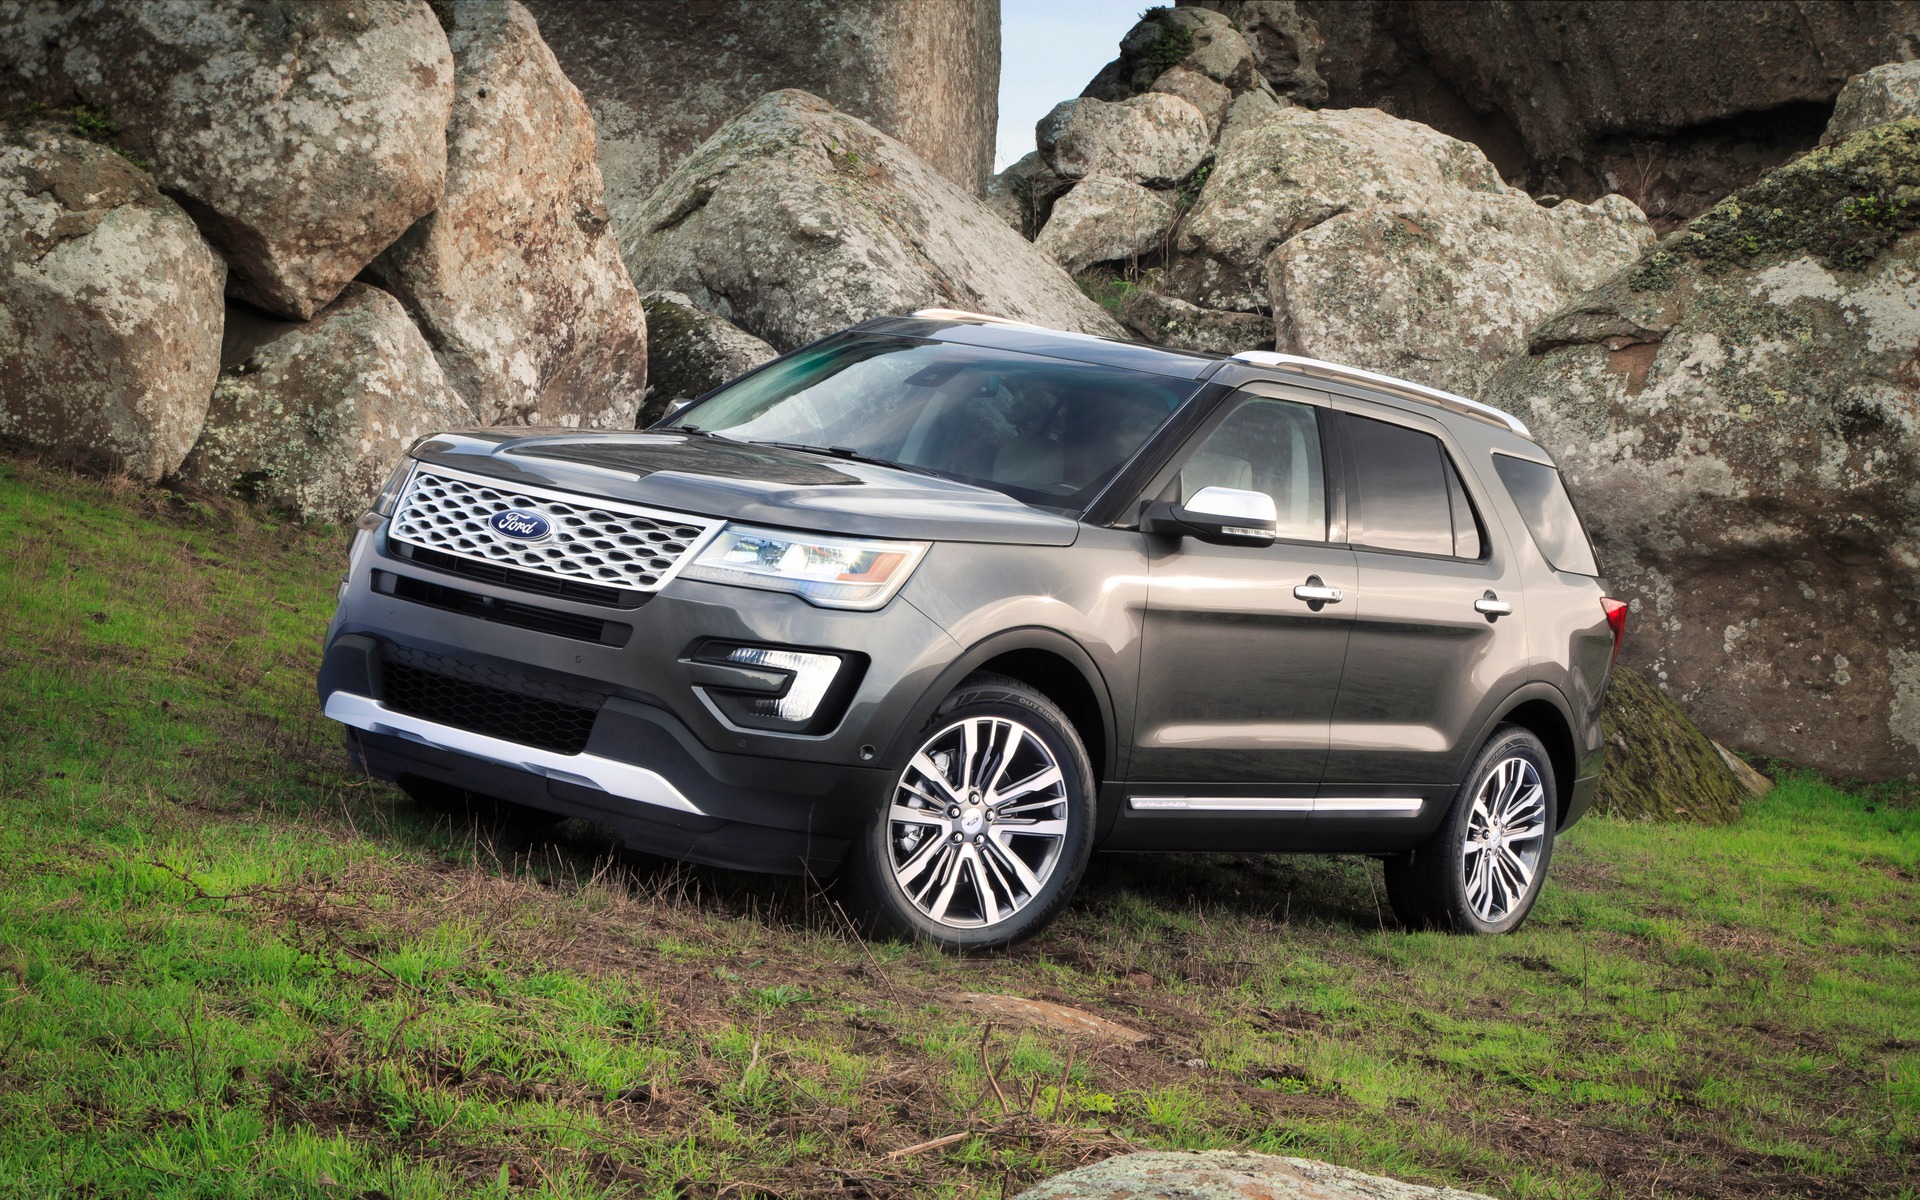 The 2016 Ford Explorer.